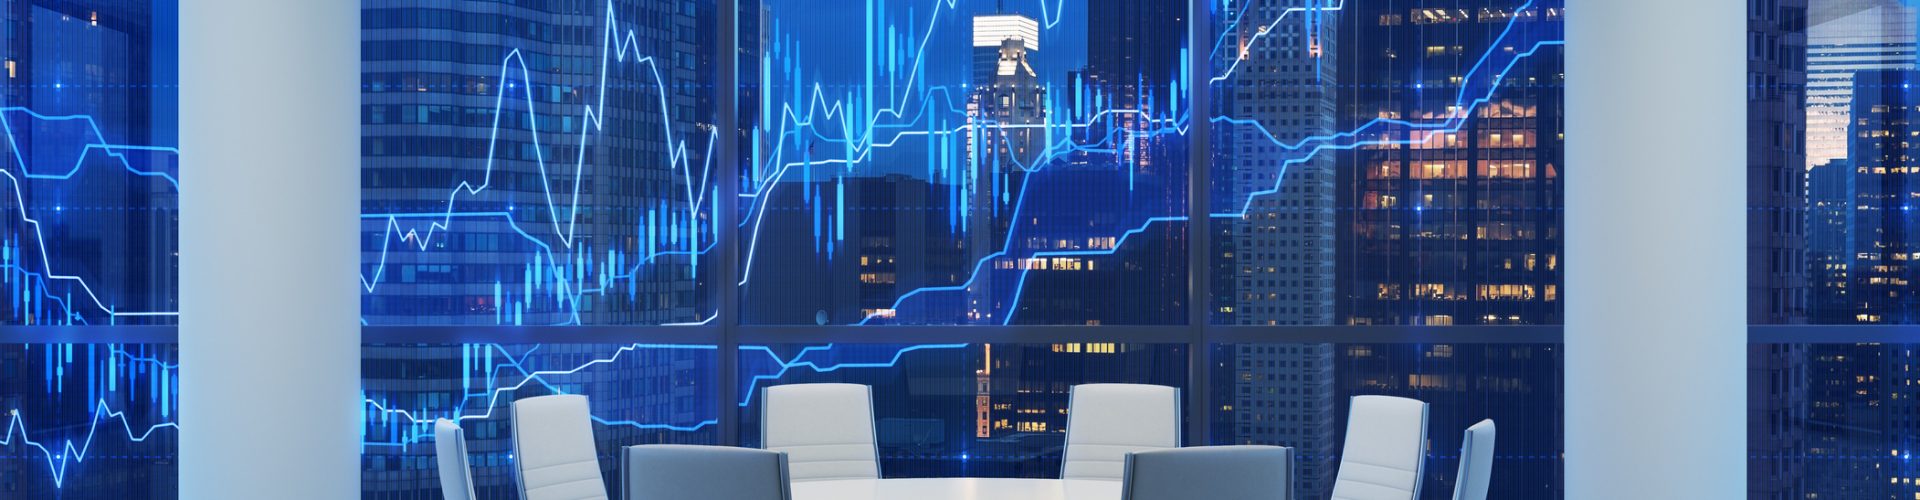 Panoramic conference room in modern office, cityscape of New York skyscrapers at night, Manhattan. Financial chart is over the cityscape. White chairs and a white round table. 3D rendering.